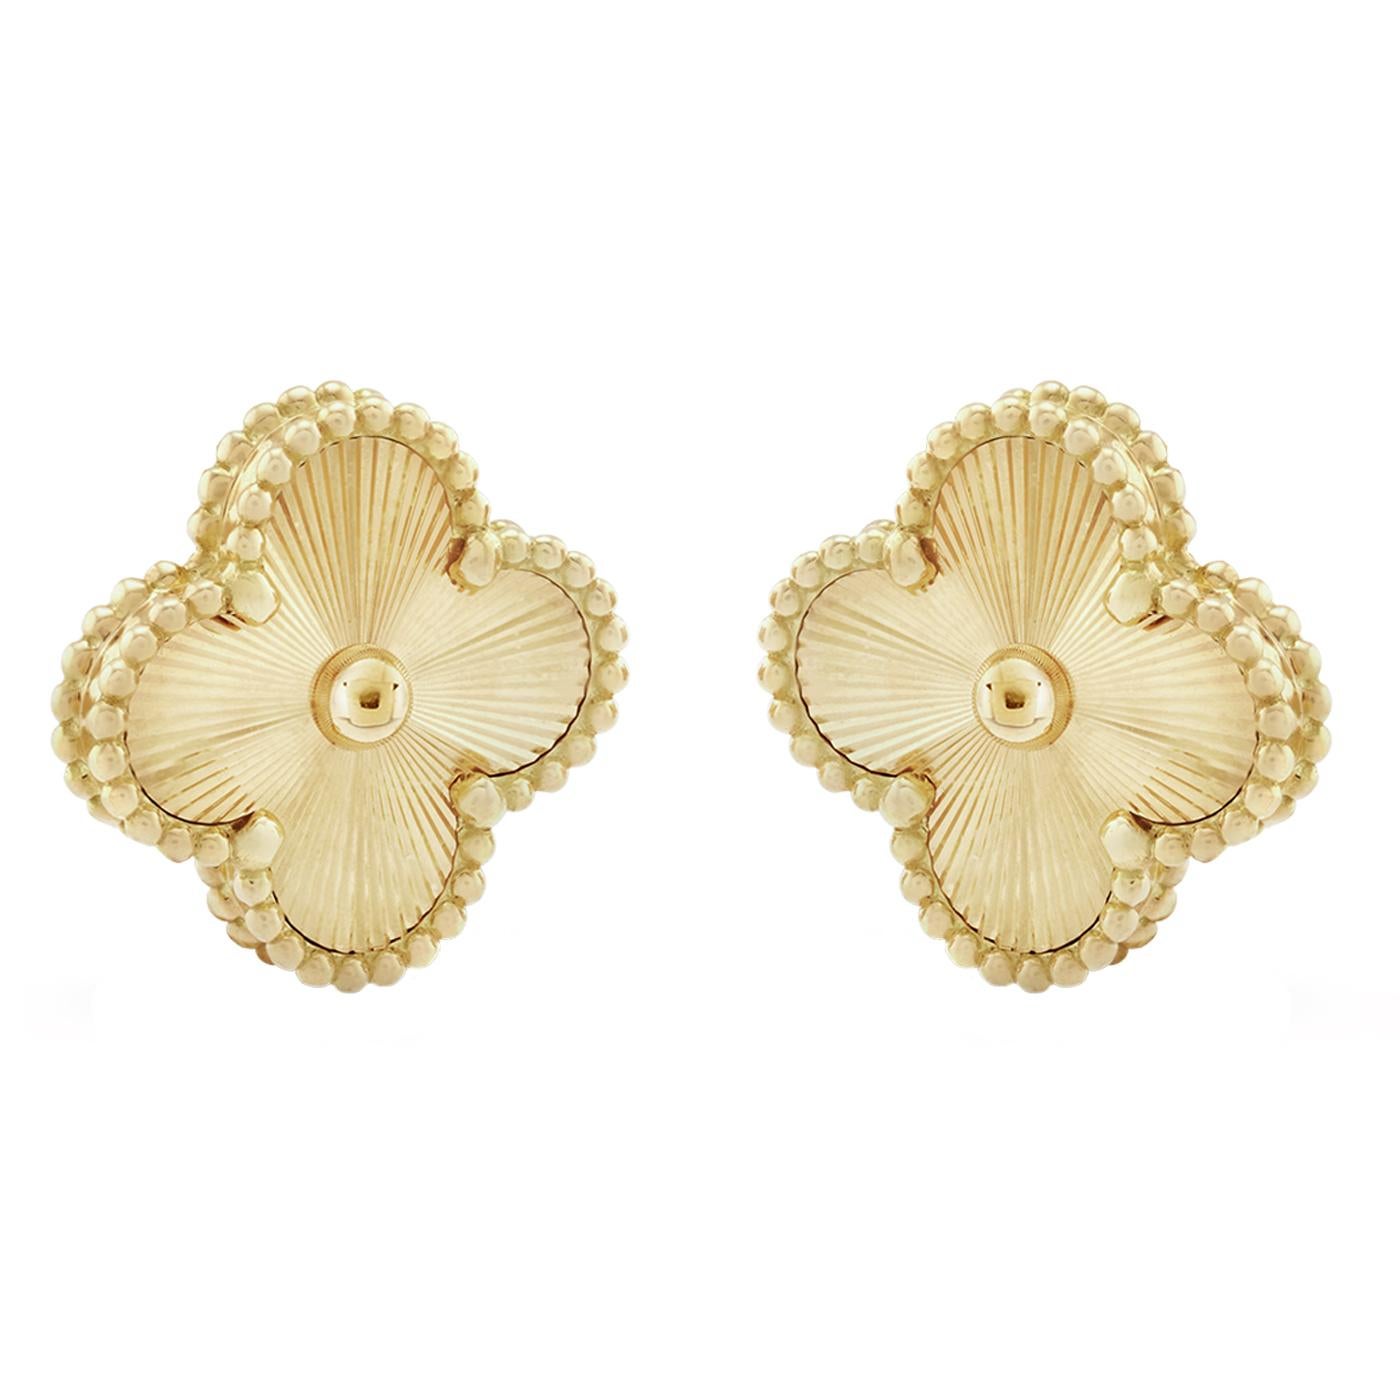 Faithful to the very first Alhambra® jewel created in 1968, the Vintage Alhambra creations by Van Cleef & Arpels are distinguished by their unique, timeless elegance. Inspired by the clover leaf, these icons of luck are adorned with a border of